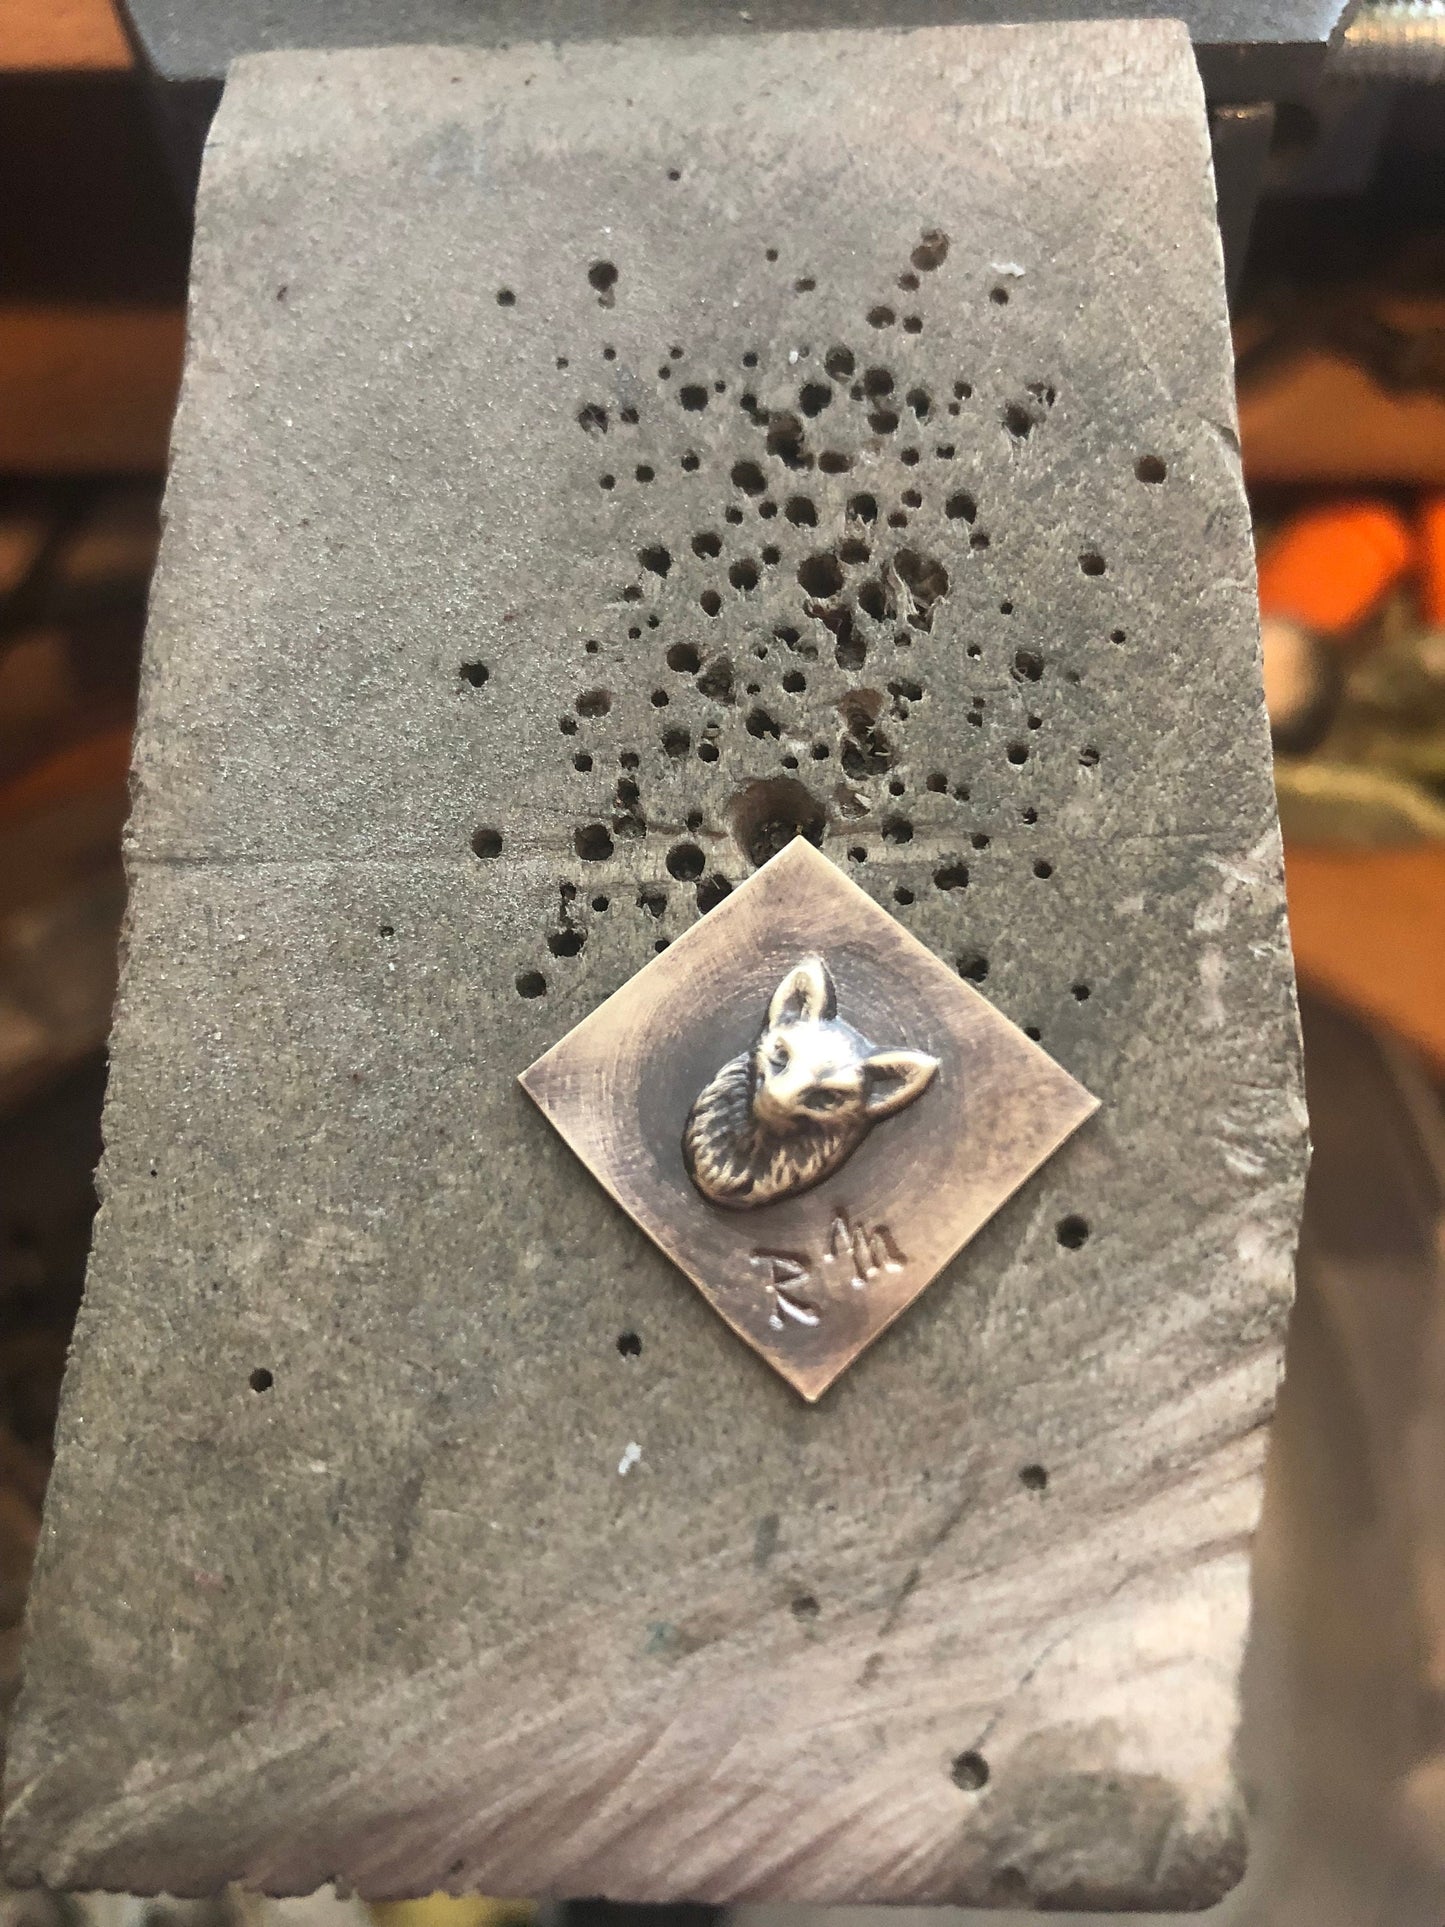 Pressed Metal Smiling Fox Design Impression for Jewelry Making